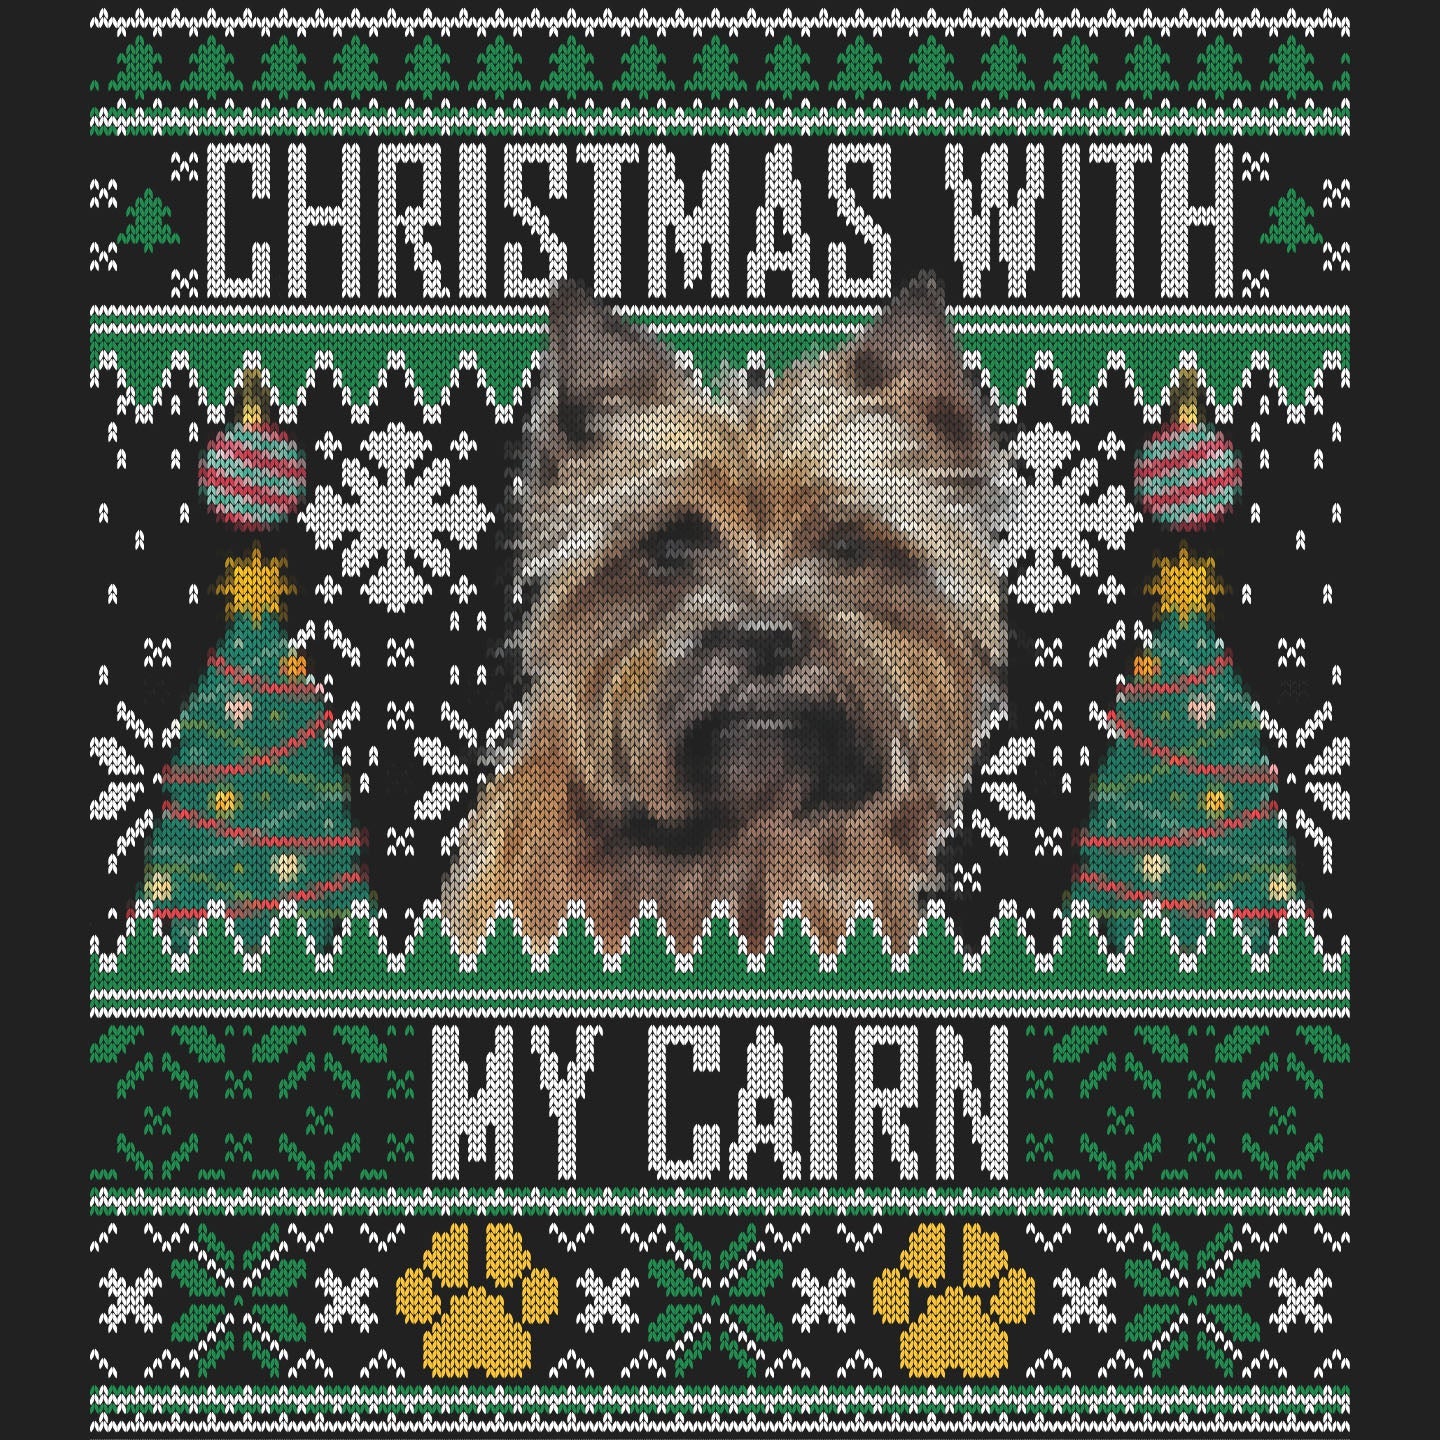 Ugly Sweater Christmas with My Cairn Terrier - Women's V-Neck Long Sleeve T-Shirt